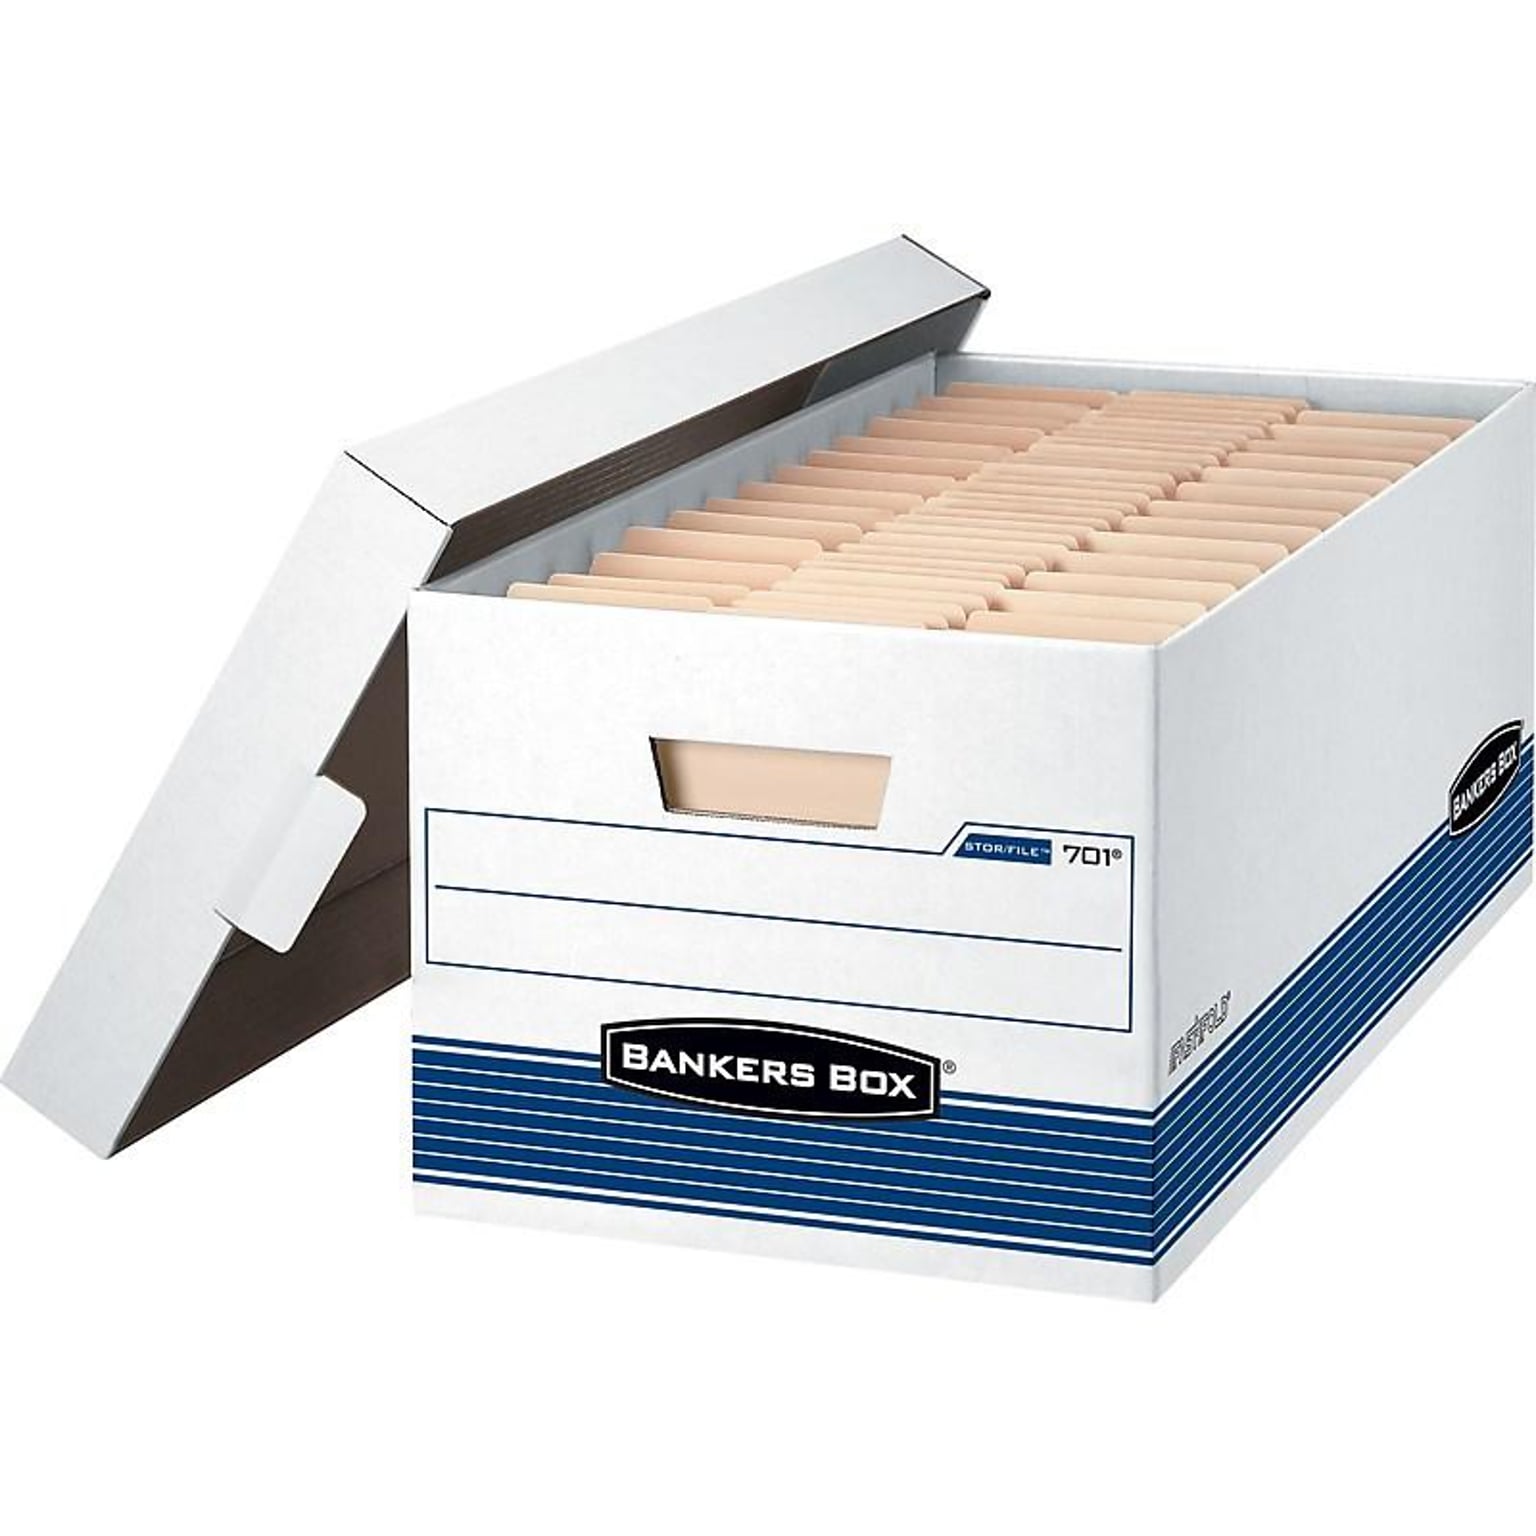 Bankers Box Medium-Duty FastFold Corrugated File Storage Boxes, Lift-Off Lid, 24 Legal Size, White/Blue, 4/Carton (0070205)